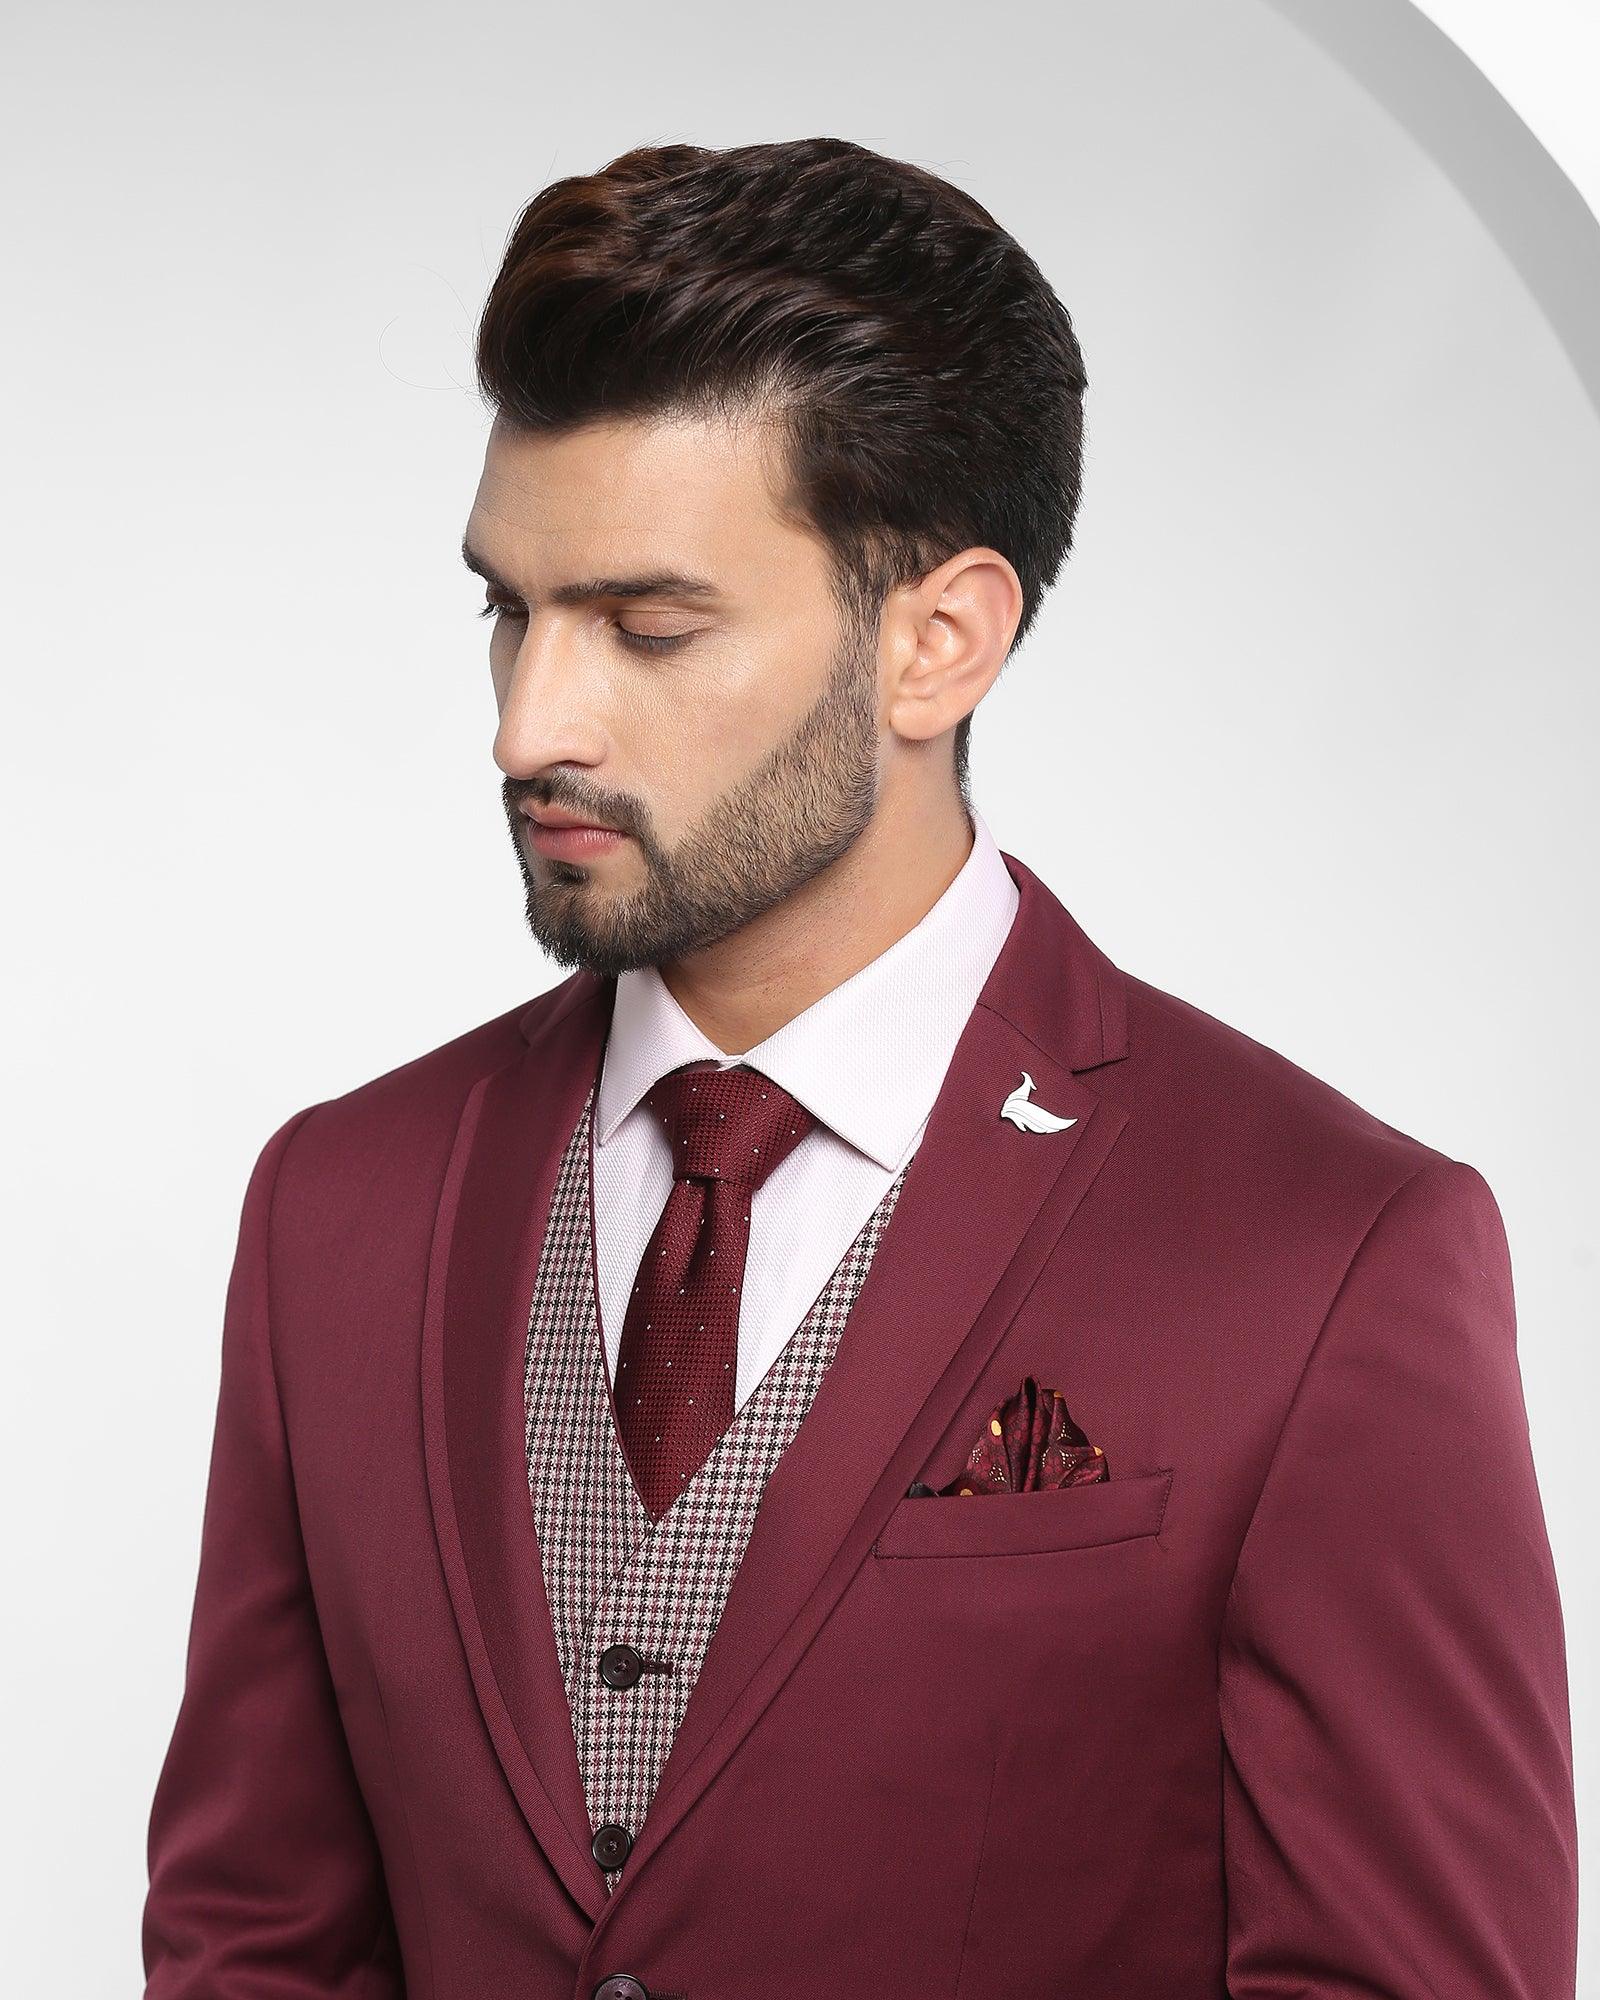 Top more than 253 formal suit design latest